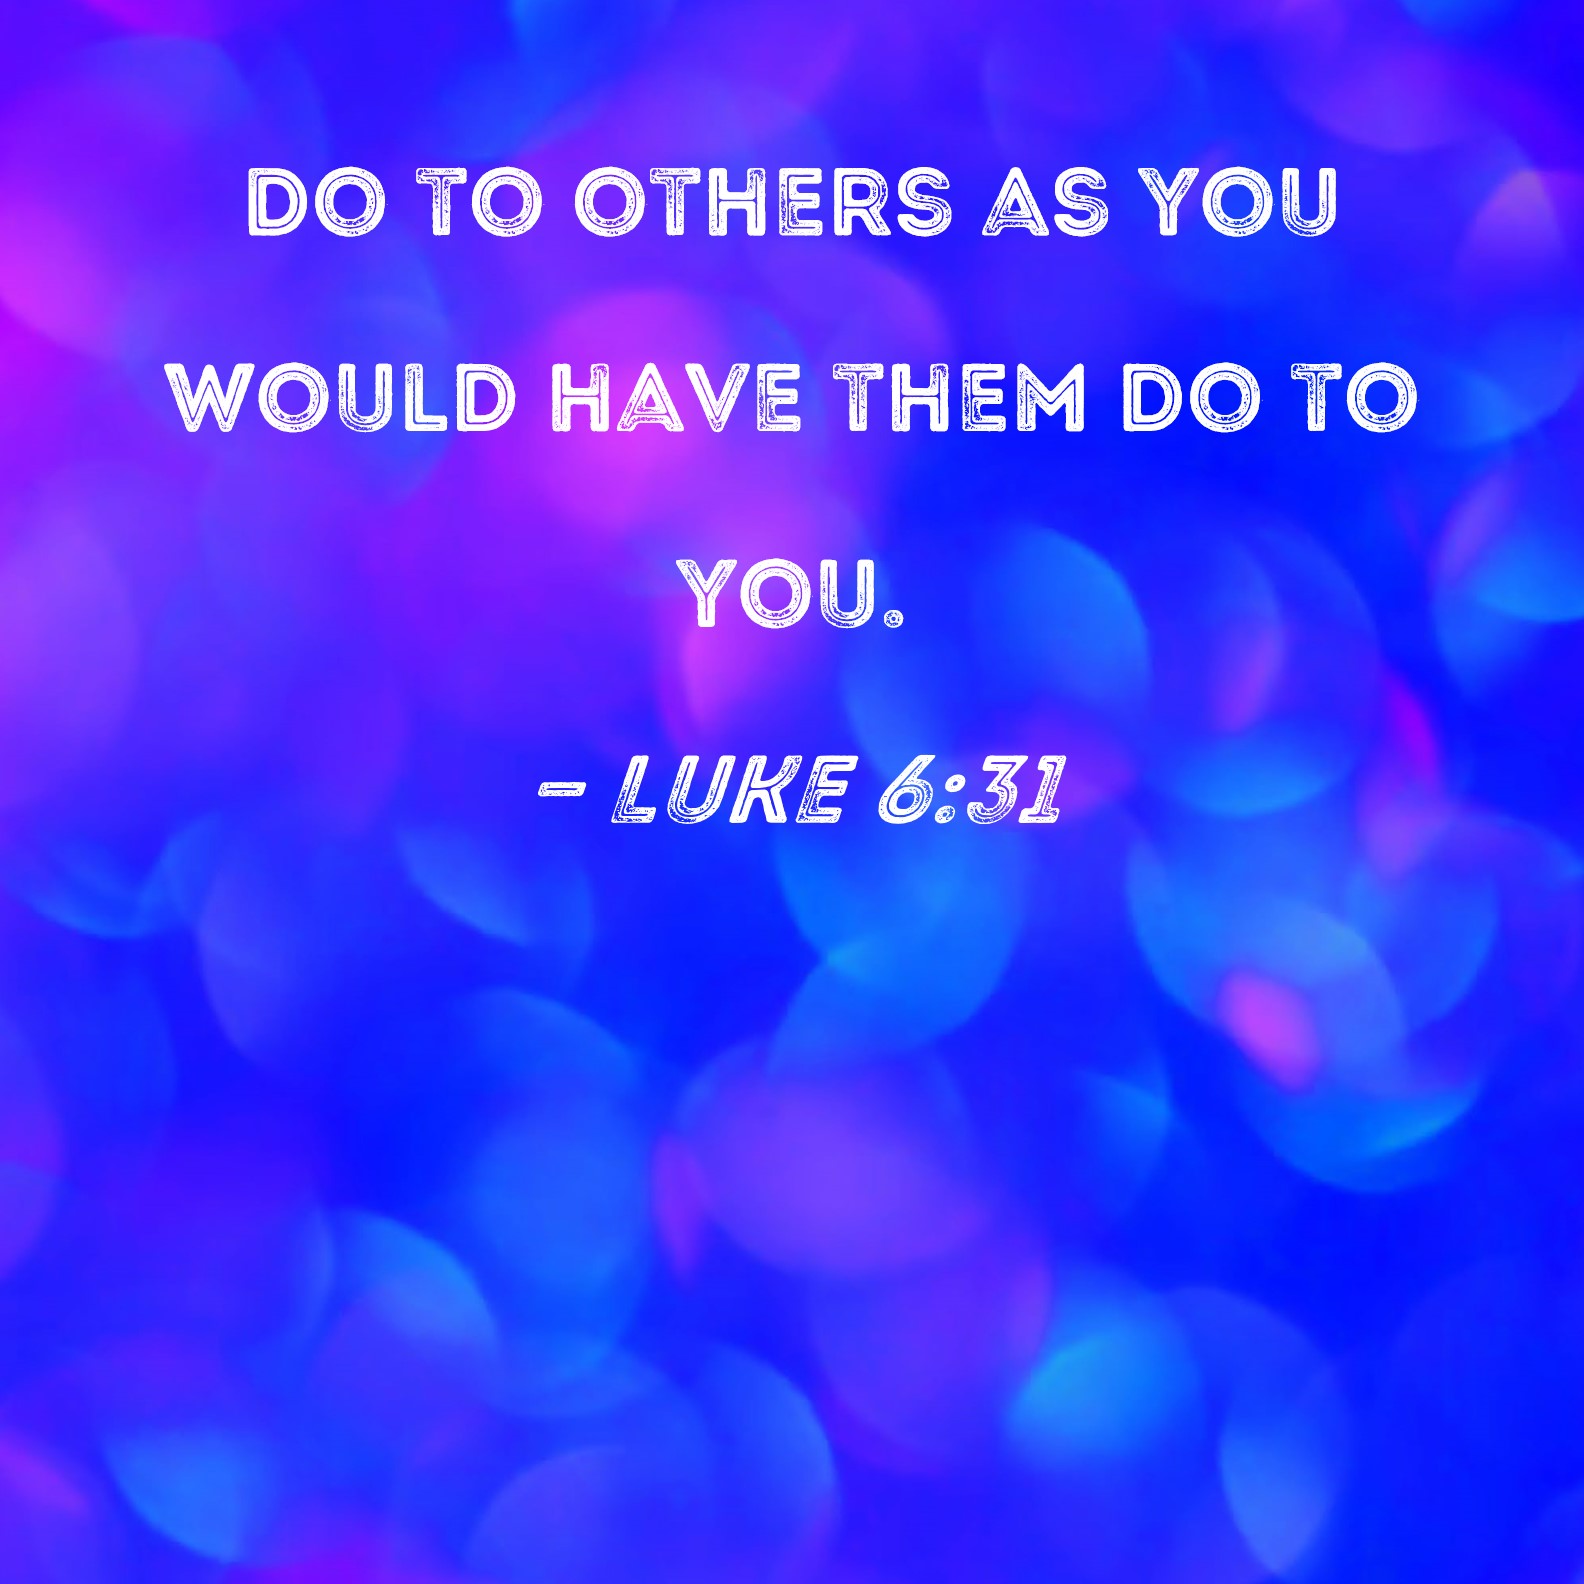 Luke 6:31 Do to others as you would have them do to you.